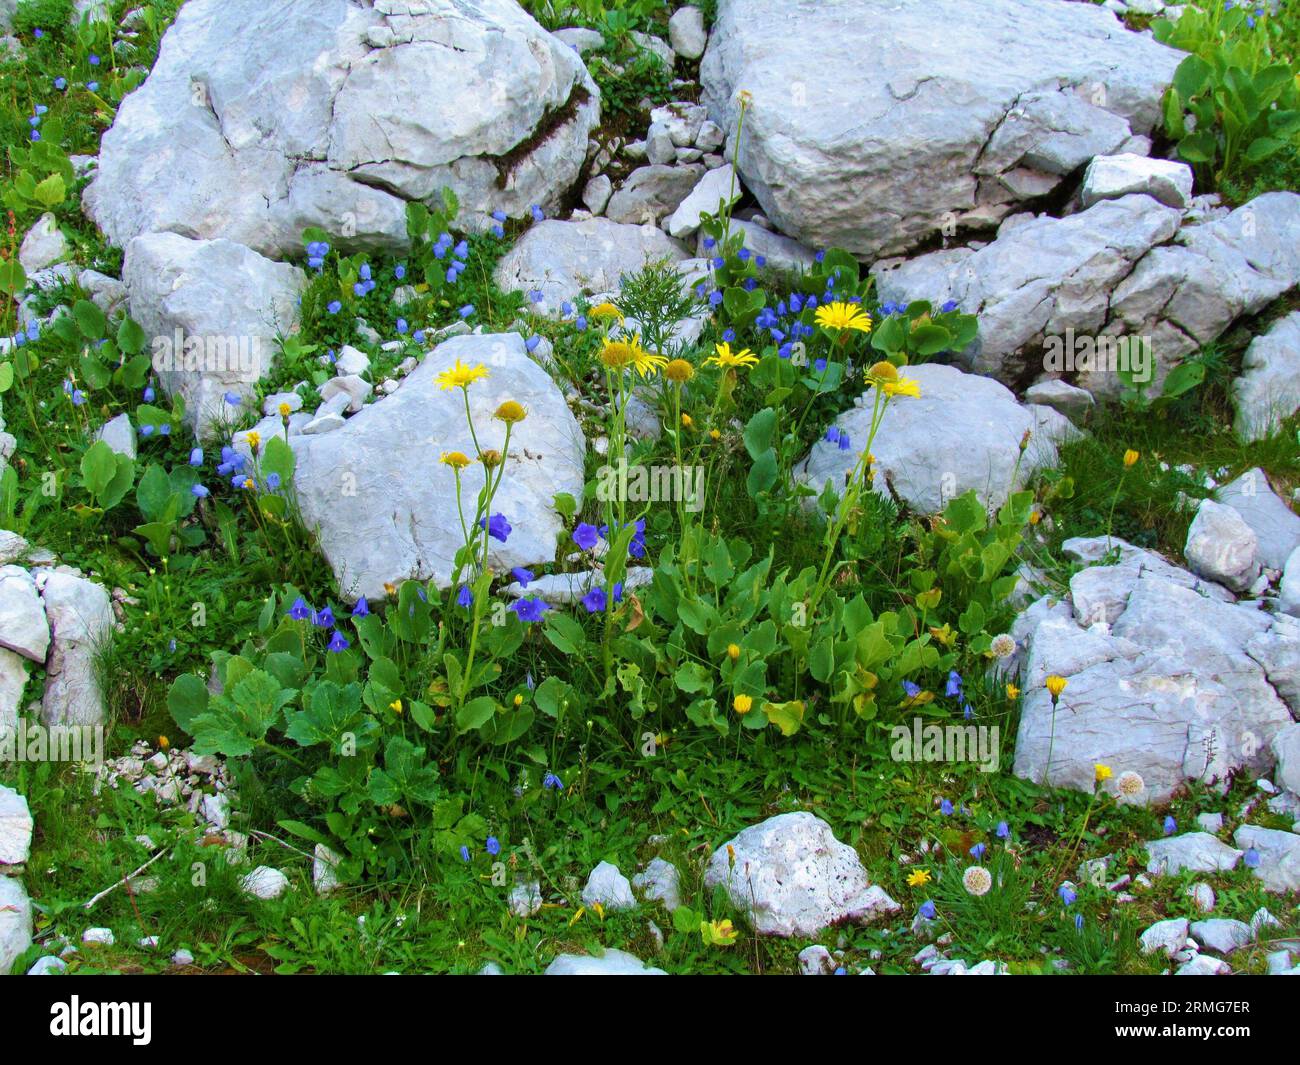 Alpine rock garden with earleaf bellflower or fairy's-thimble (Campanula cochleariifolia) and yellow blooming Doronicum grandiflorum flowers amidst th Stock Photo